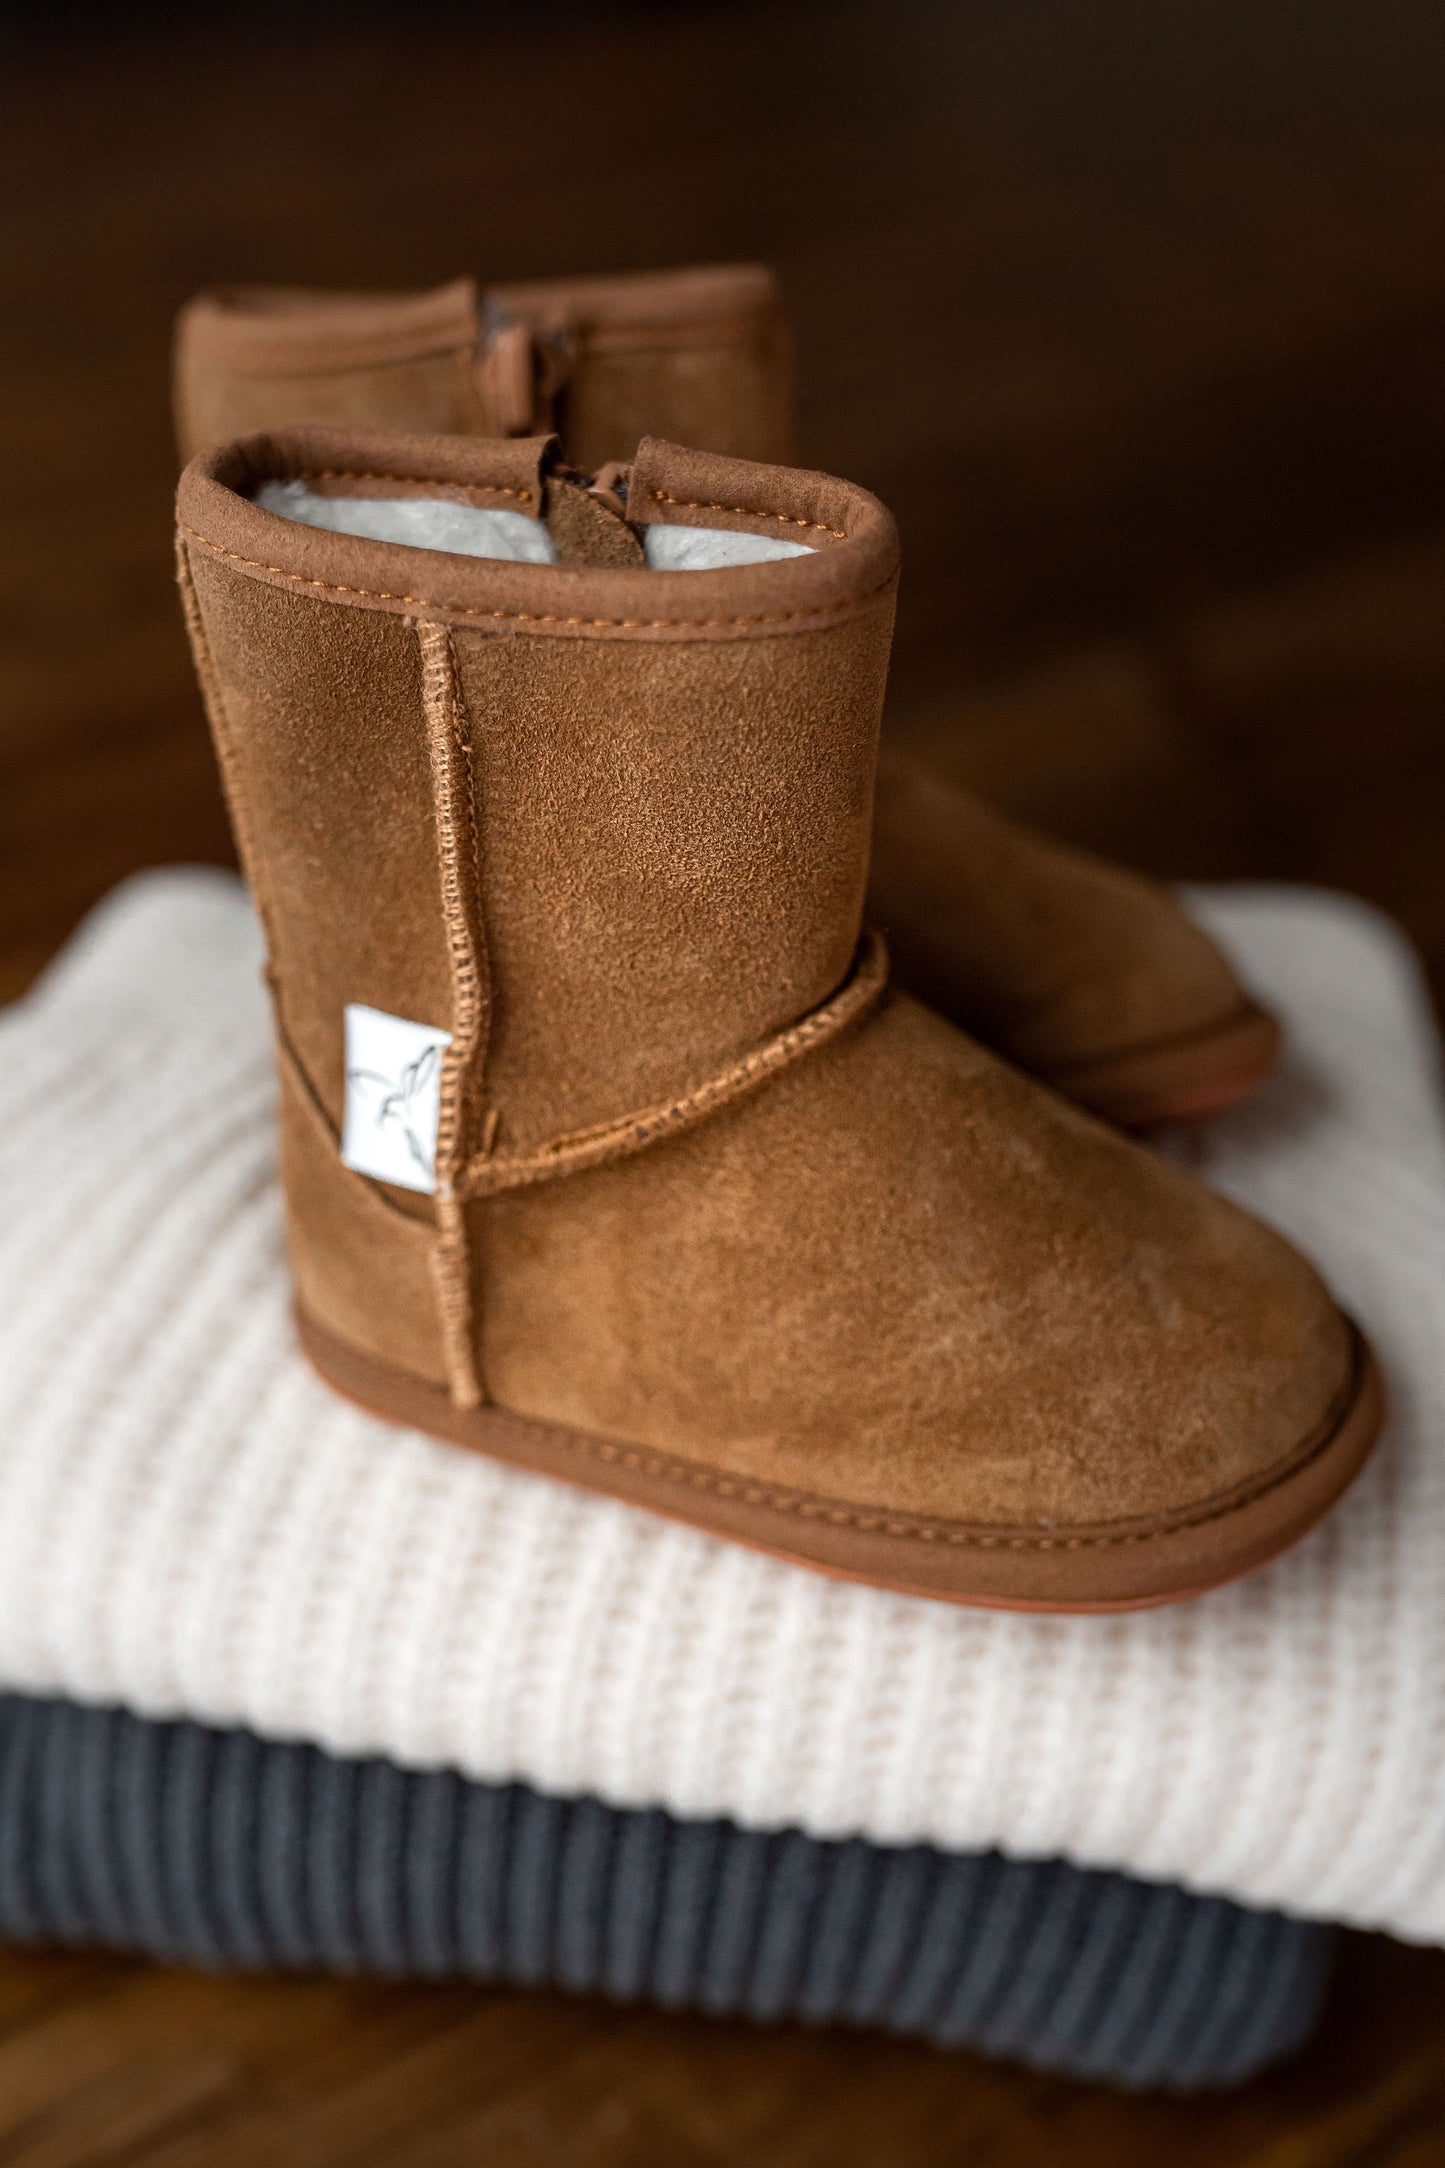 The Winter Boot